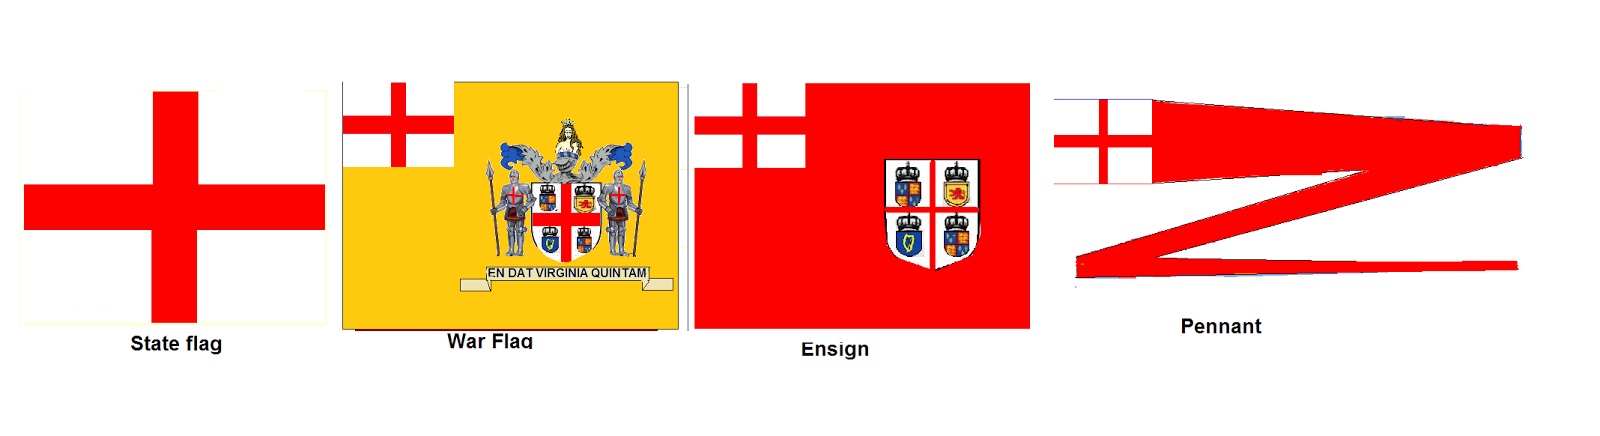 Empire Total War (game flags) | Flag With Meaning